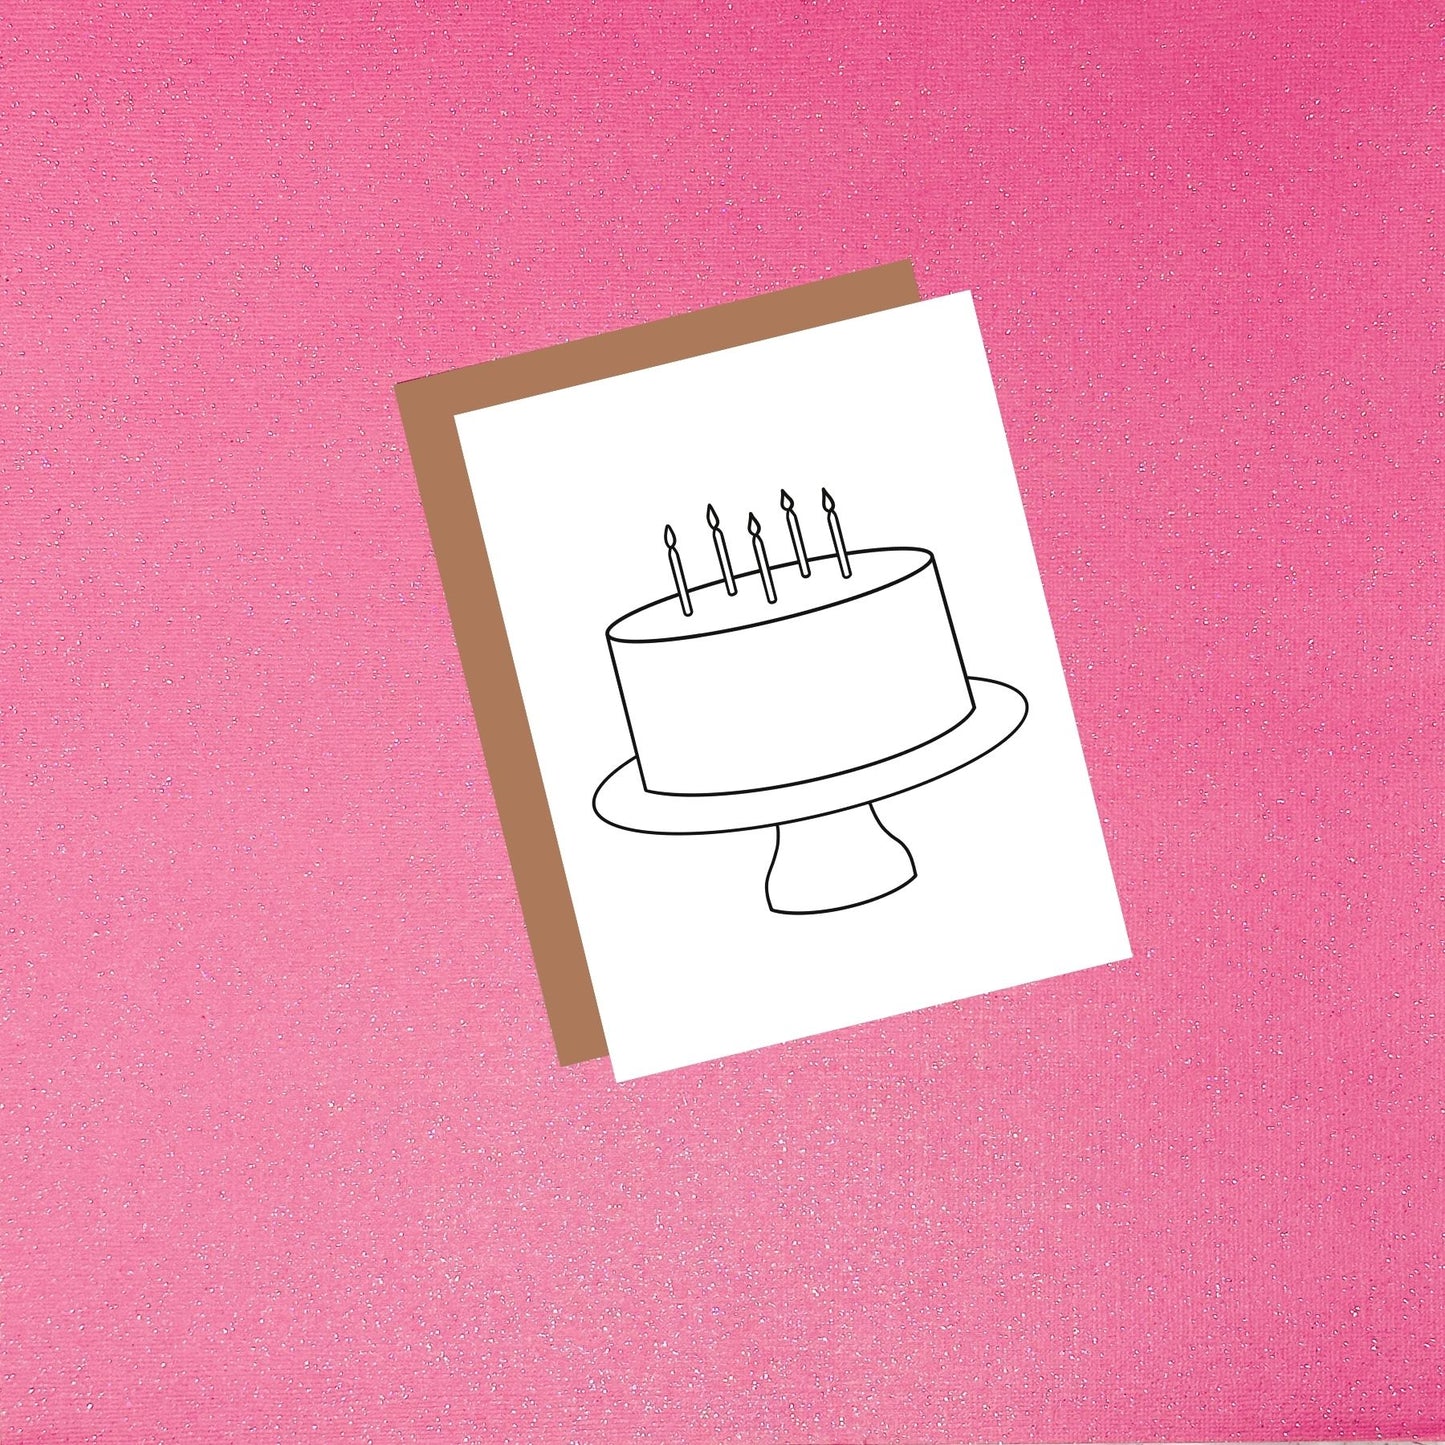 Coloring Card - Color Your Own Birthday Cake